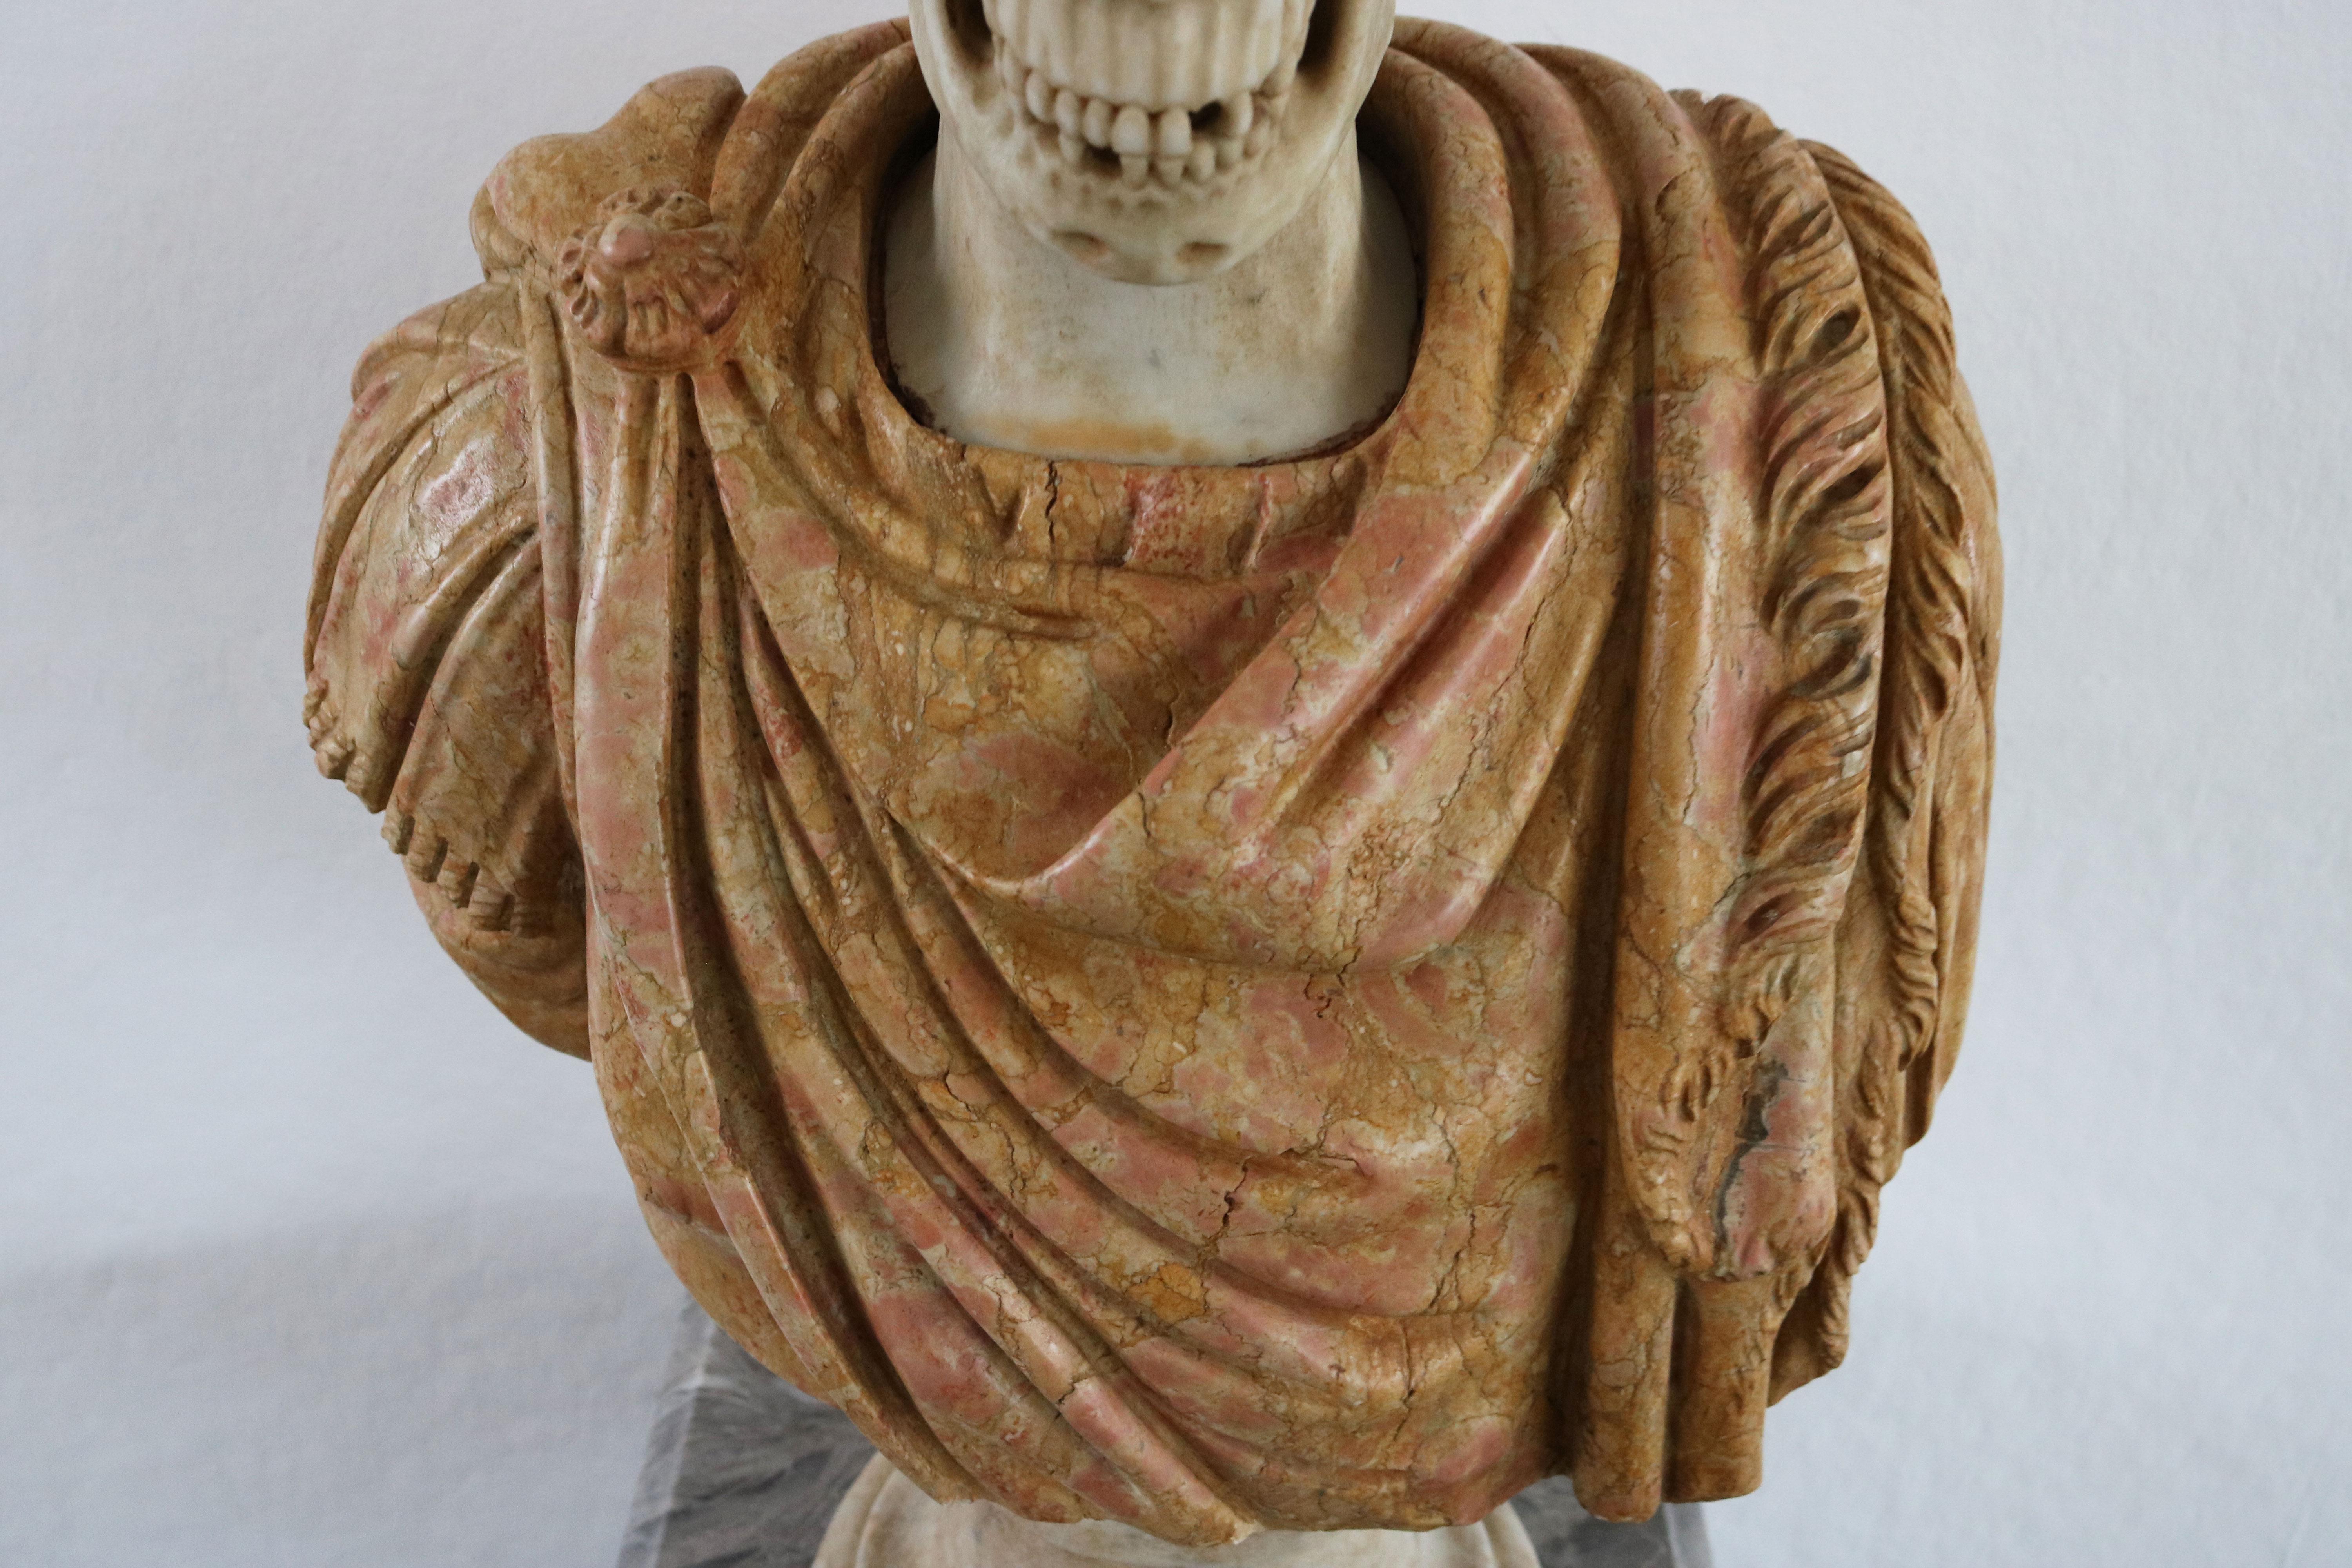 Italian Marble Bust Vanitas / Memento Mori 19th Century Carved Sculpture Italy For Sale 2